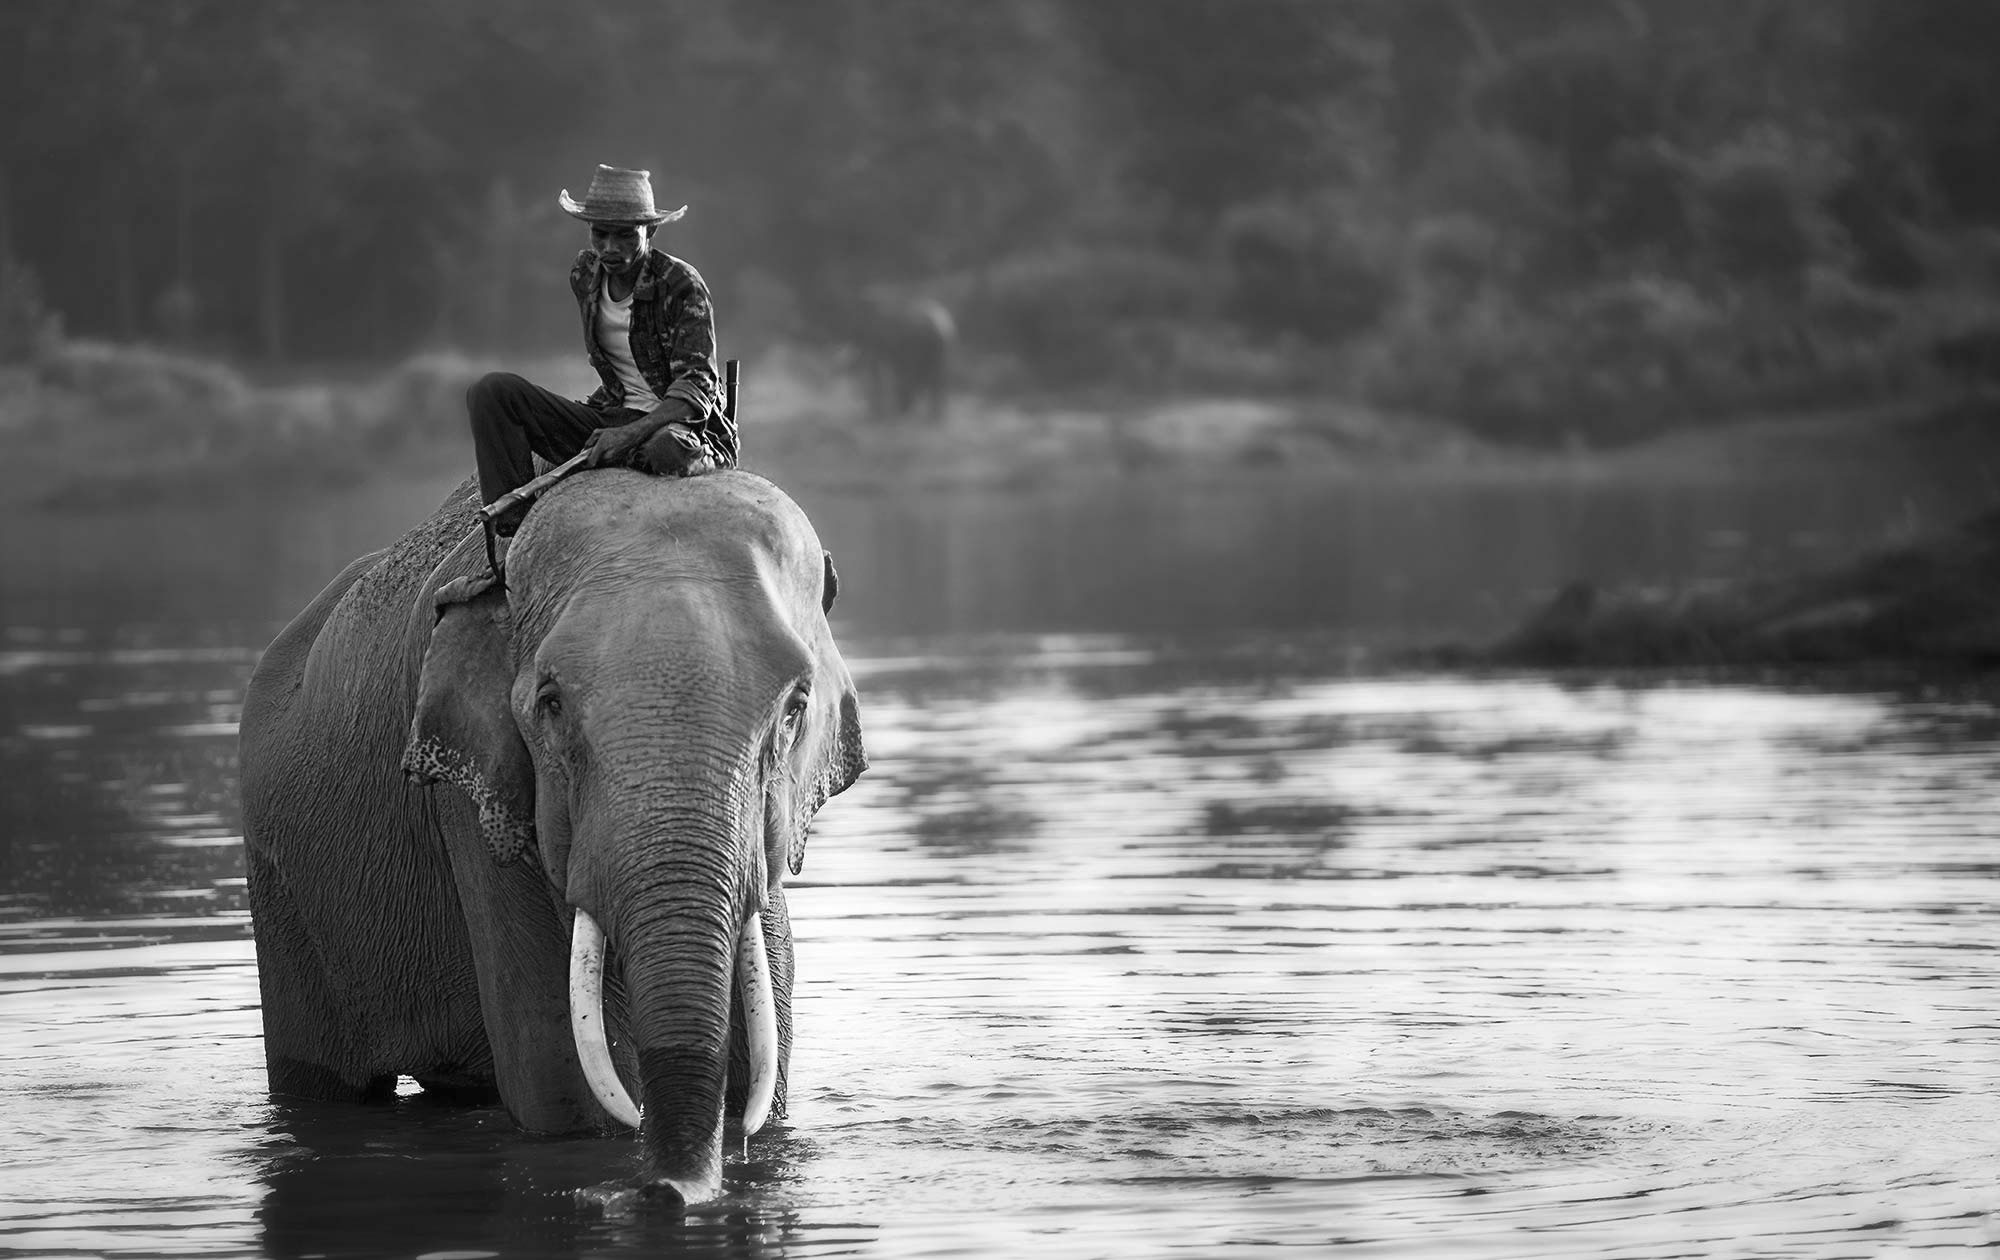 The Elephant And The Rider Emergn